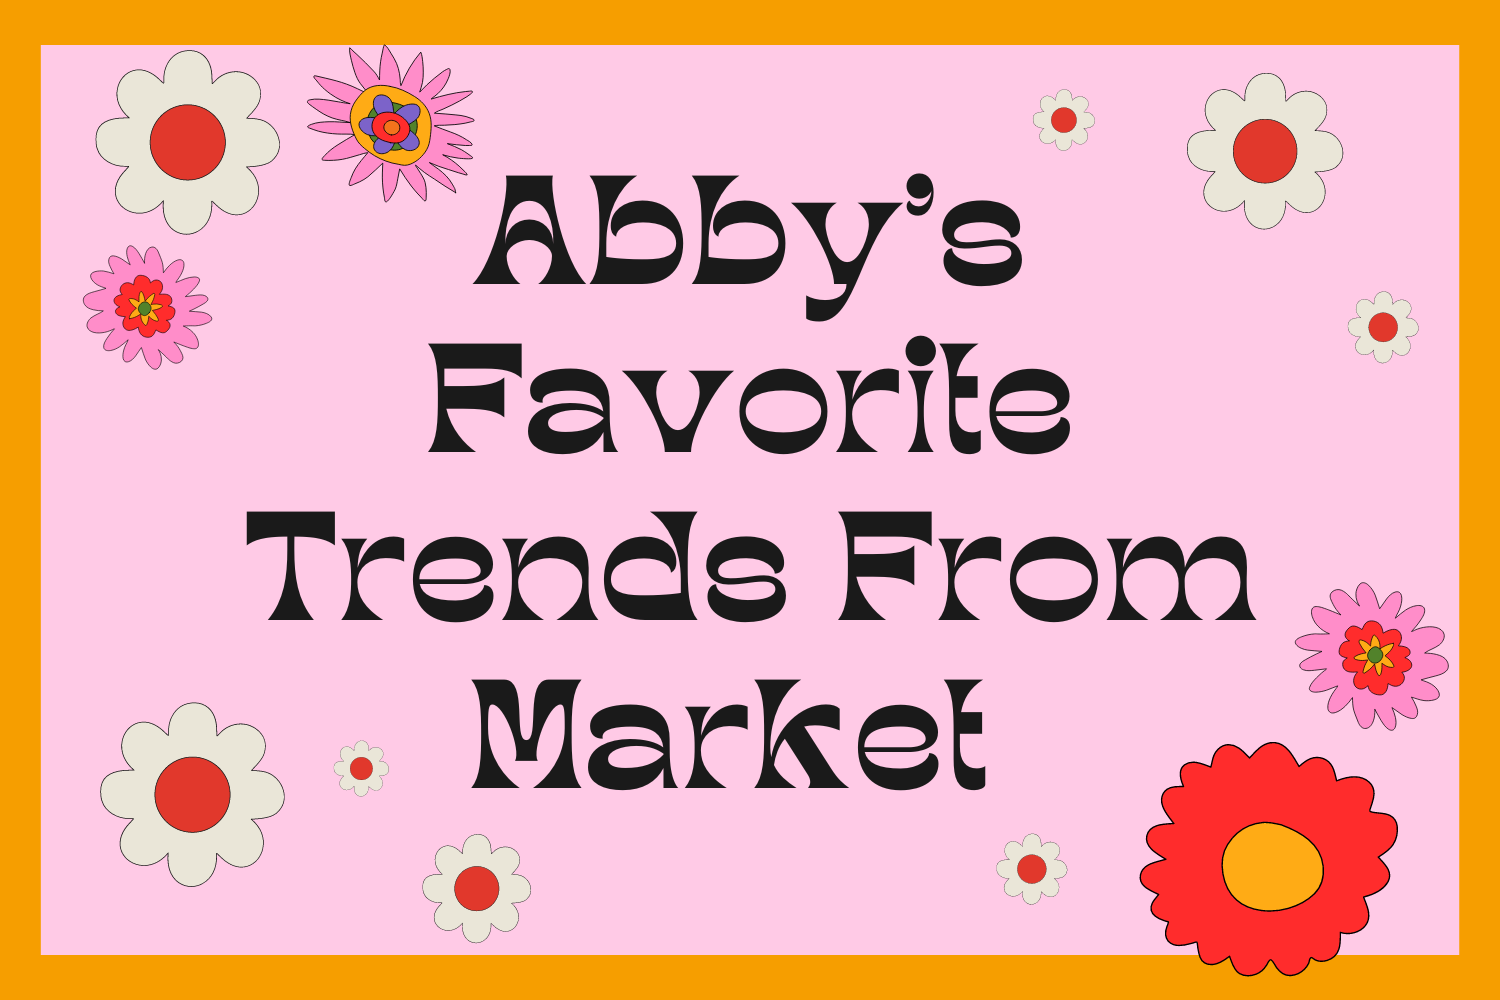 Abby's Favorite Trends From Market!